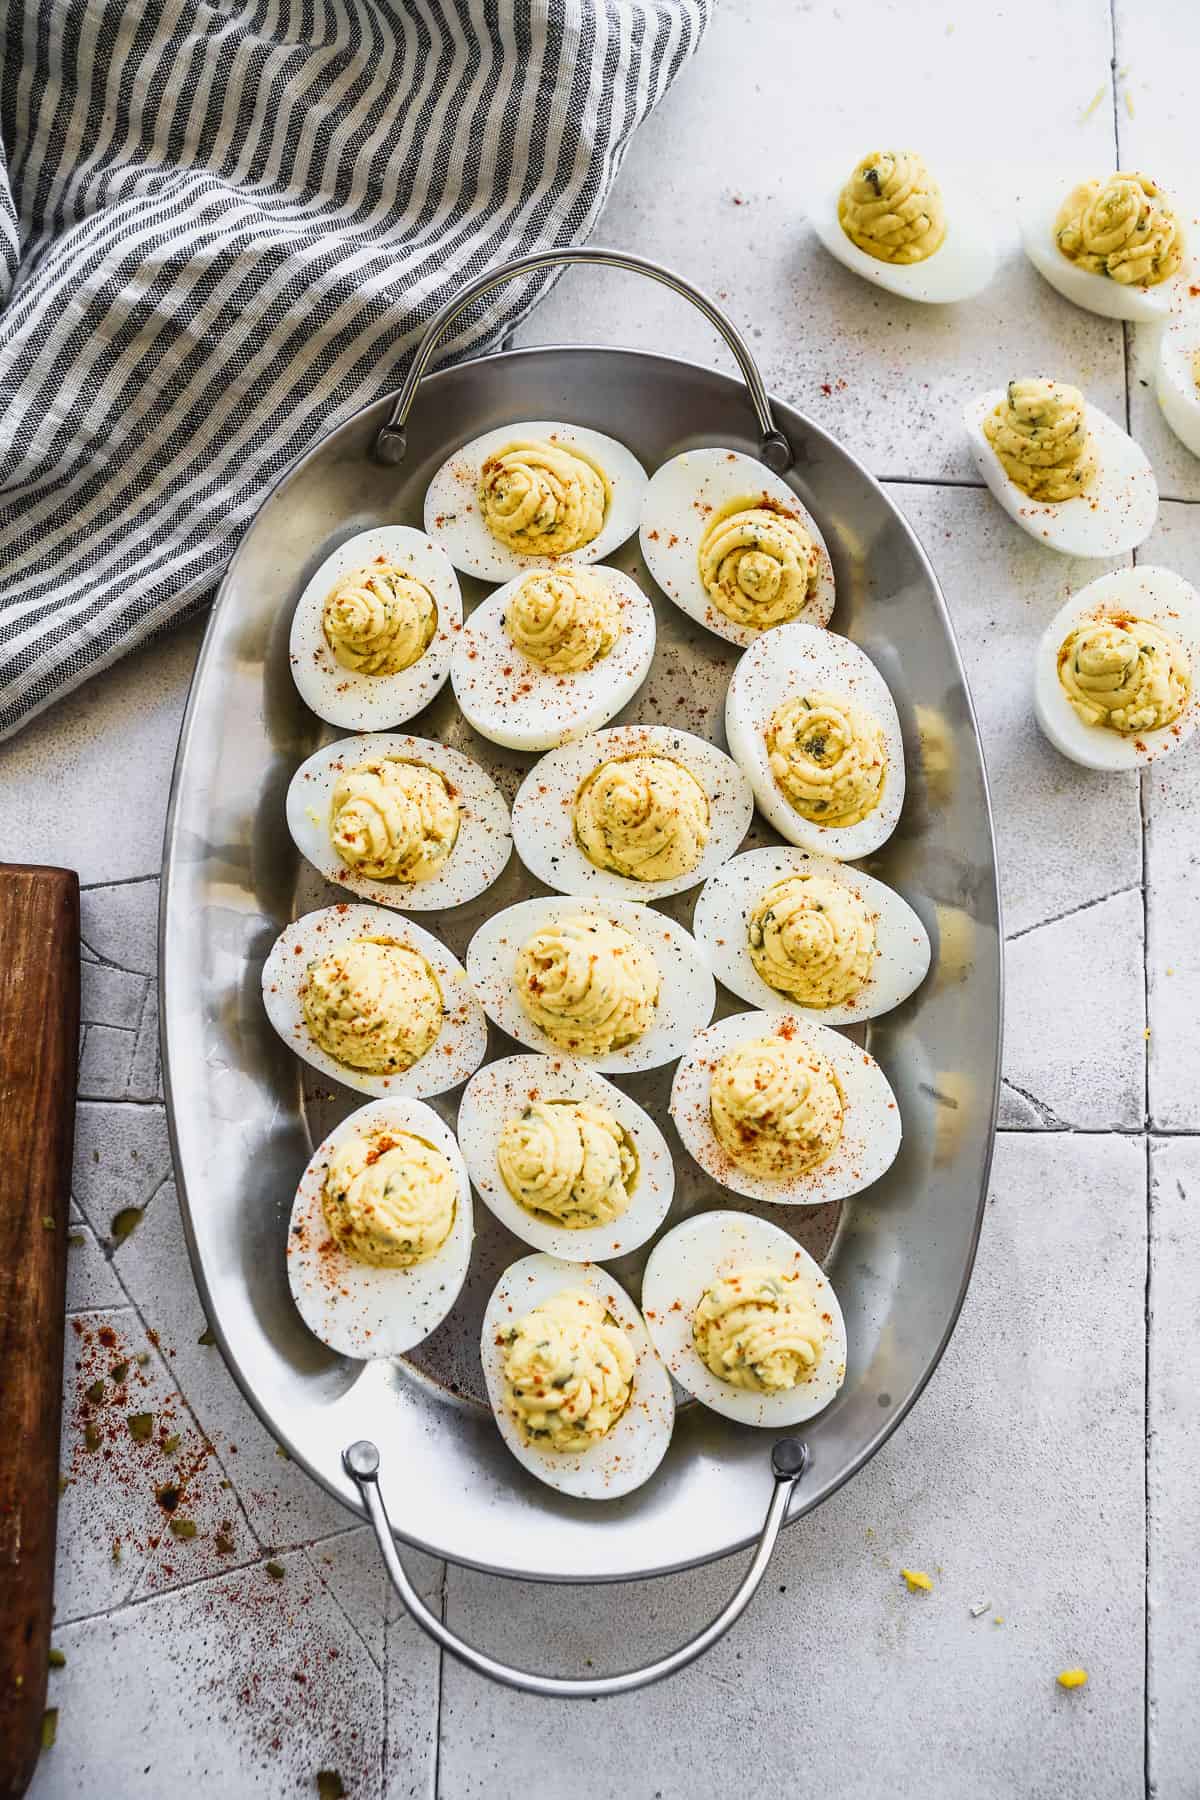 A platter of easy Deviled Eggs, topped with paprika, ready to serve.